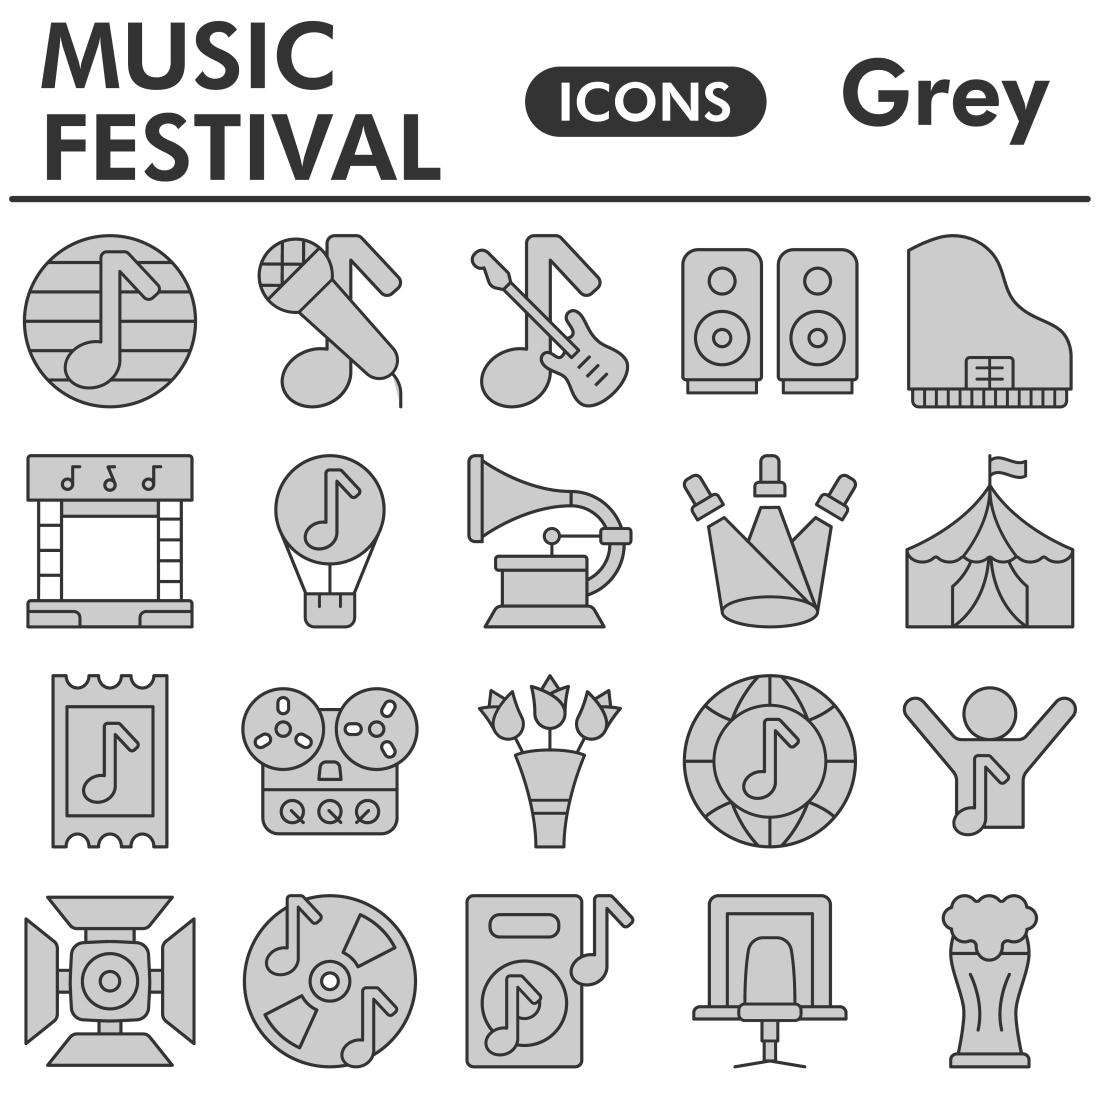 Muzic festival icons set, gray style preview image.